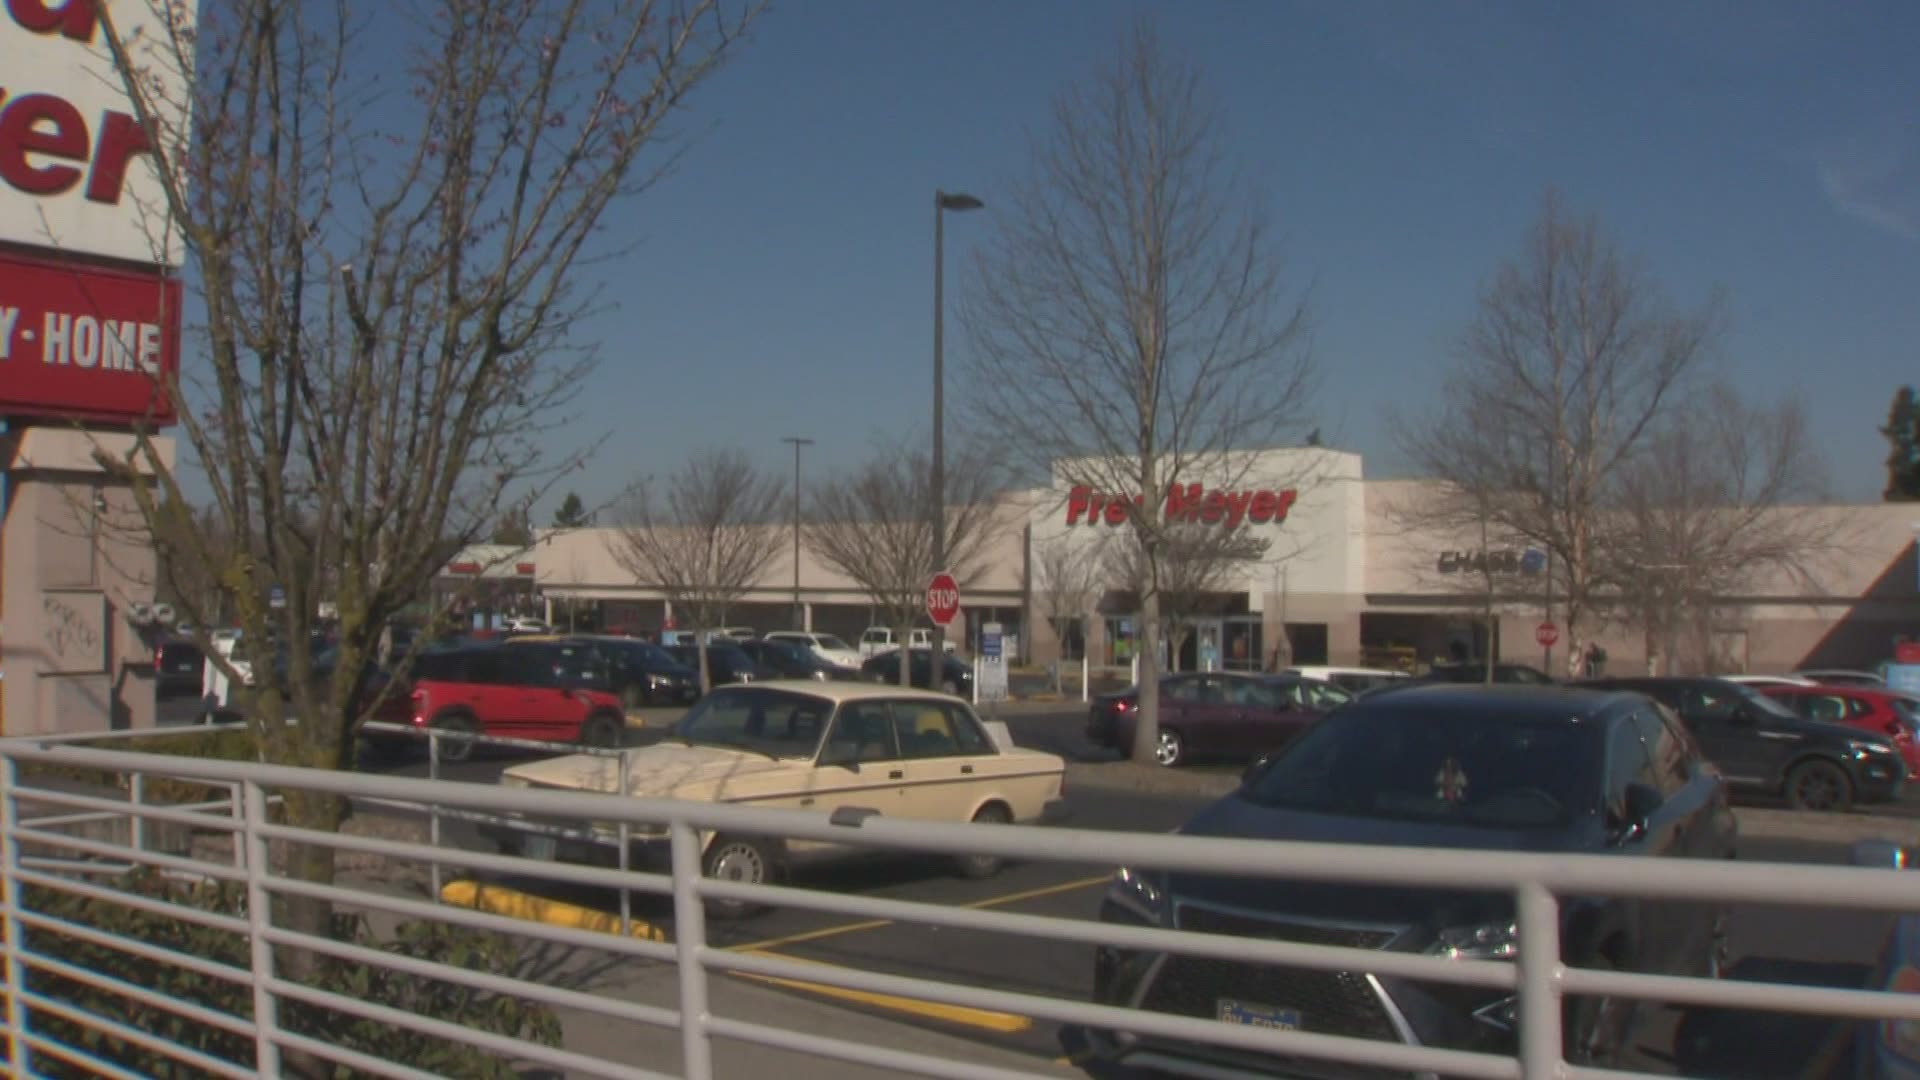 The contract between the union and Fred Meyer is set to expire Sunday, July 18. If a new contract isn't reached, a work stoppage could happen Monday at midnight.